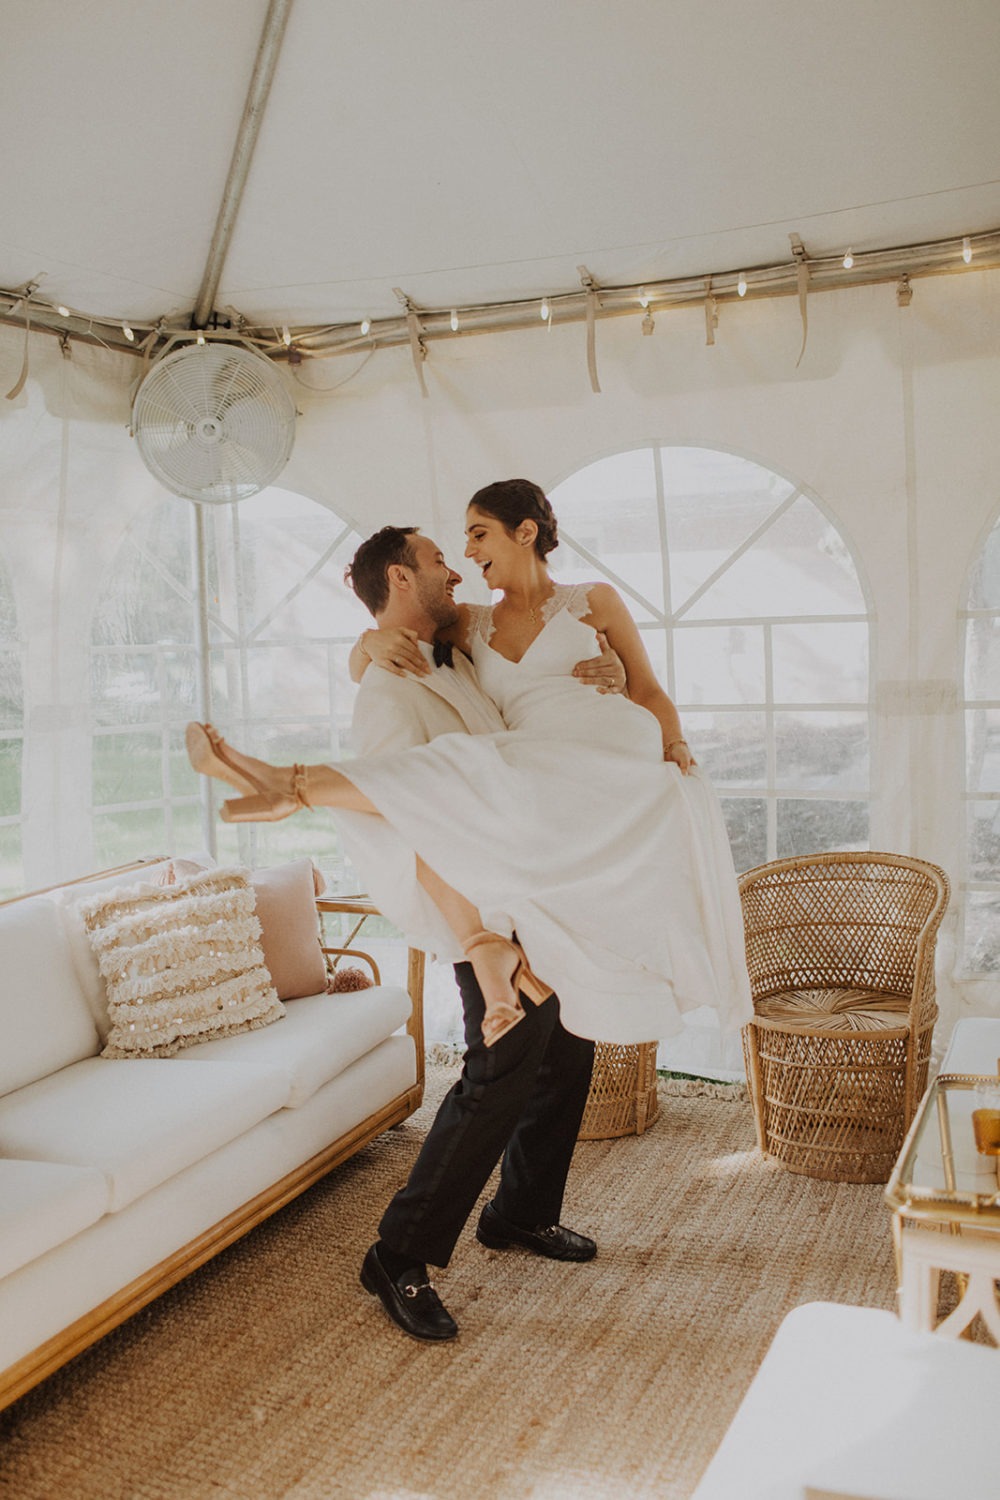 Couple embraces in reception tent at backyard wedding